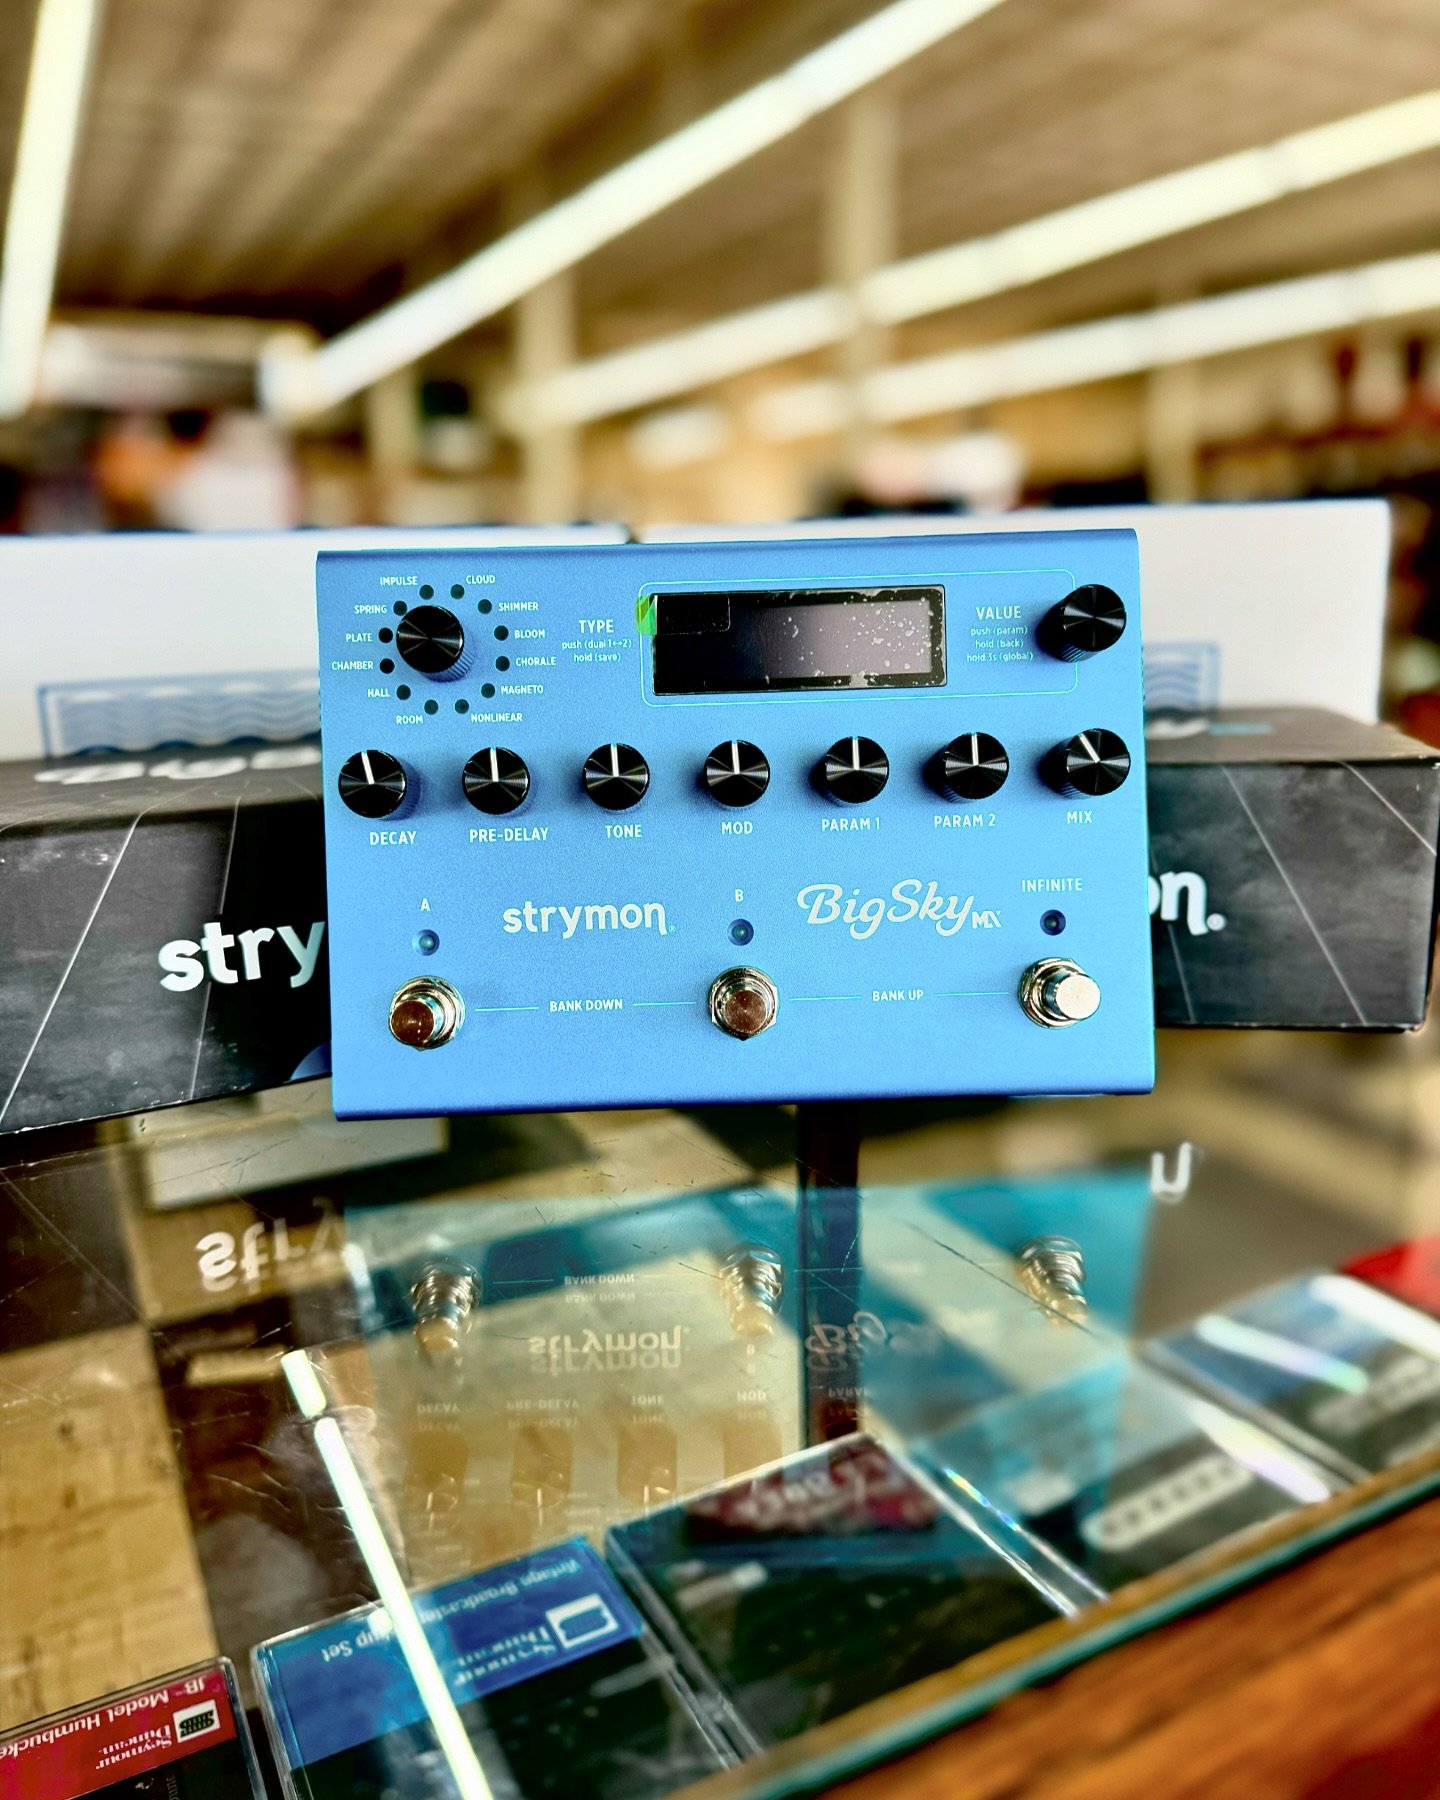 Do androids dream of electric sheep?
I dunno.. but I bet their dreams are scored by a soundtrack of beautiful multi-dimensional soundscapes created by the best sounding reverb engine around. I betcha the new Strymon Big Sky MX is conducting that orch